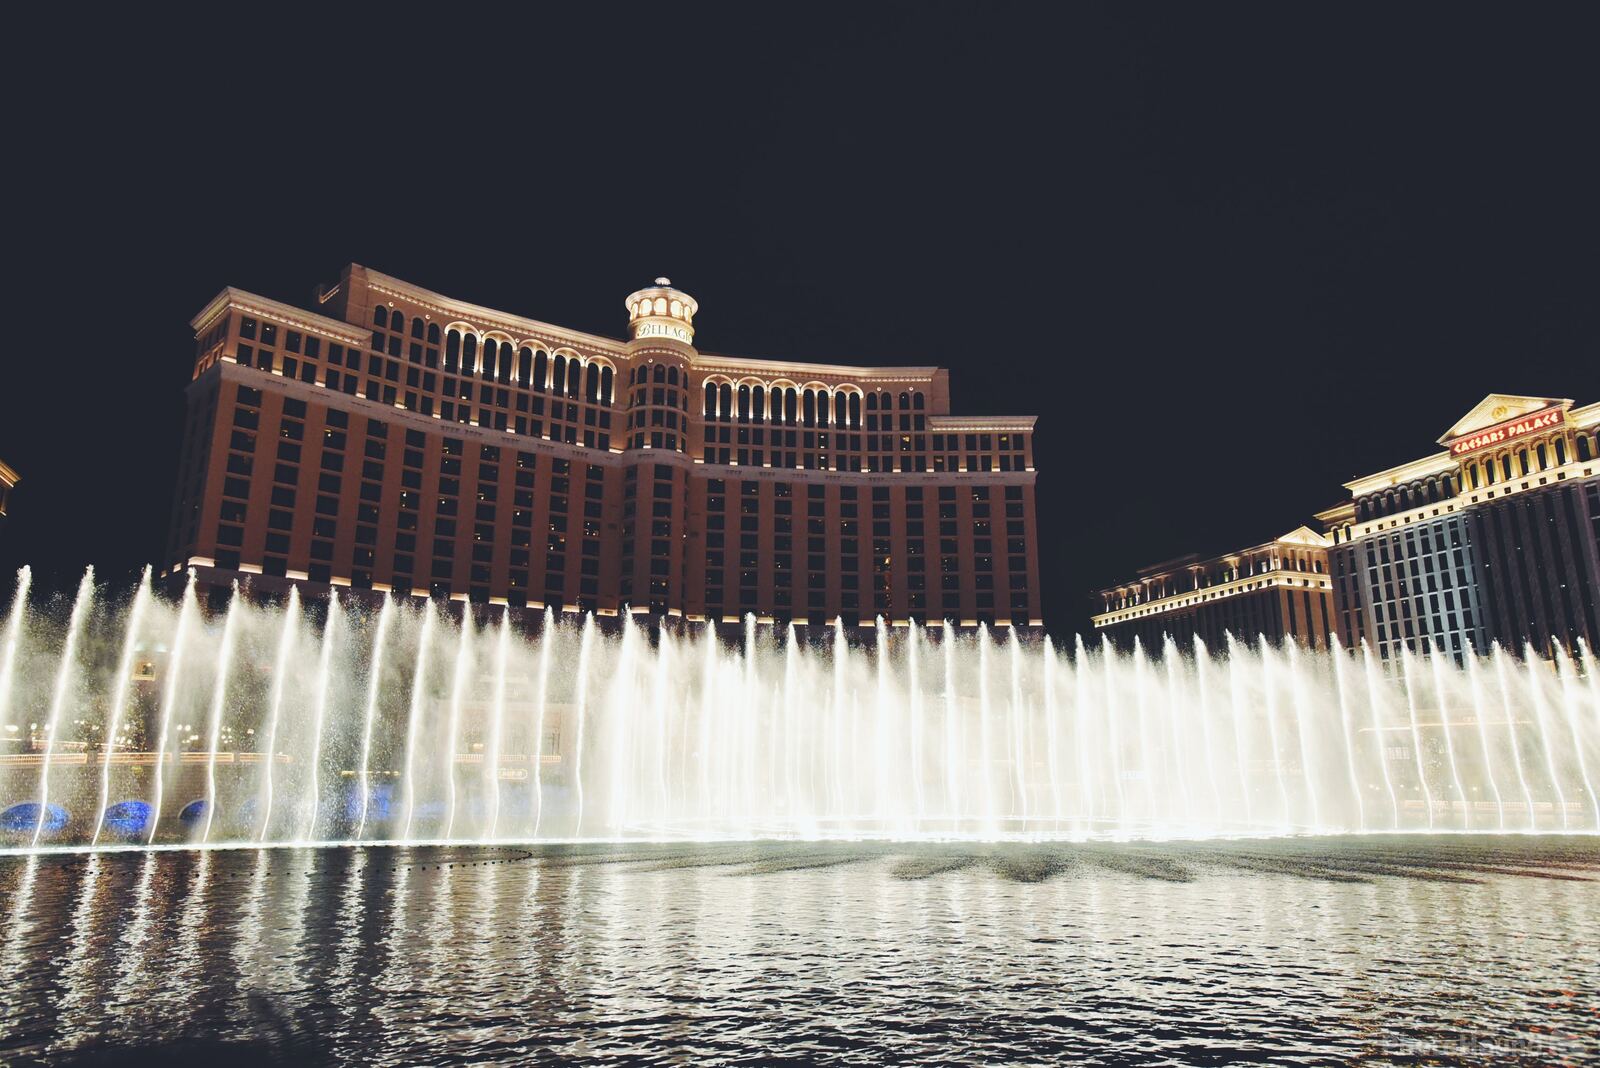 Image of Bellagio Fountains by Team PhotoHound